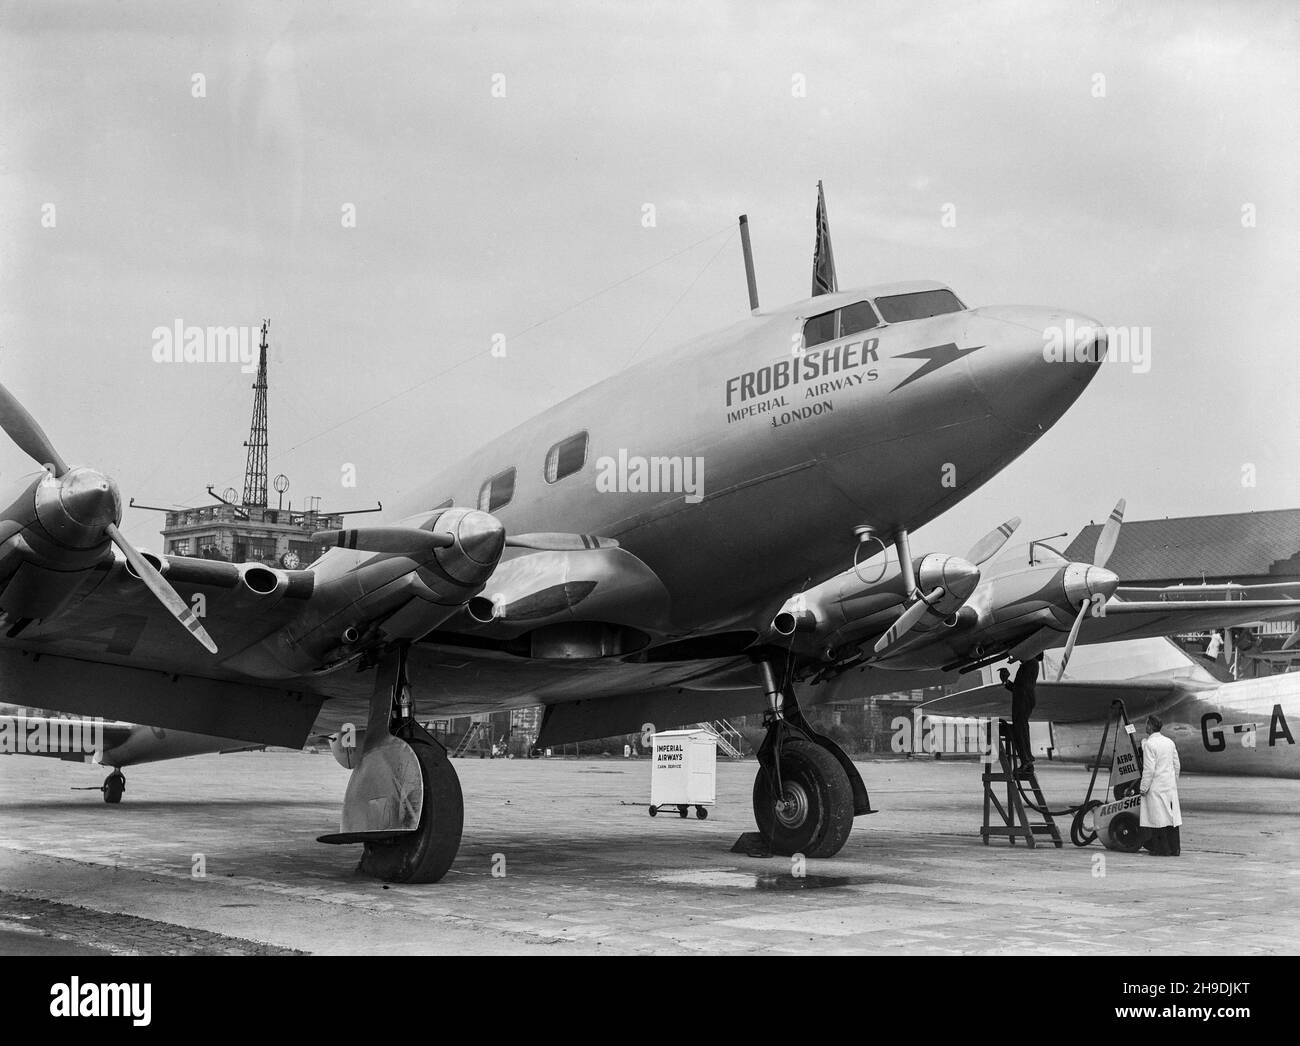 Vintage black and white photograph taken in 1938 showing a A De Havilland DH.91 Albatross, serial number G-AFDI, named Frobisher, of Imperial Airways at Croydon Aerodrome, outside London. Stock Photo